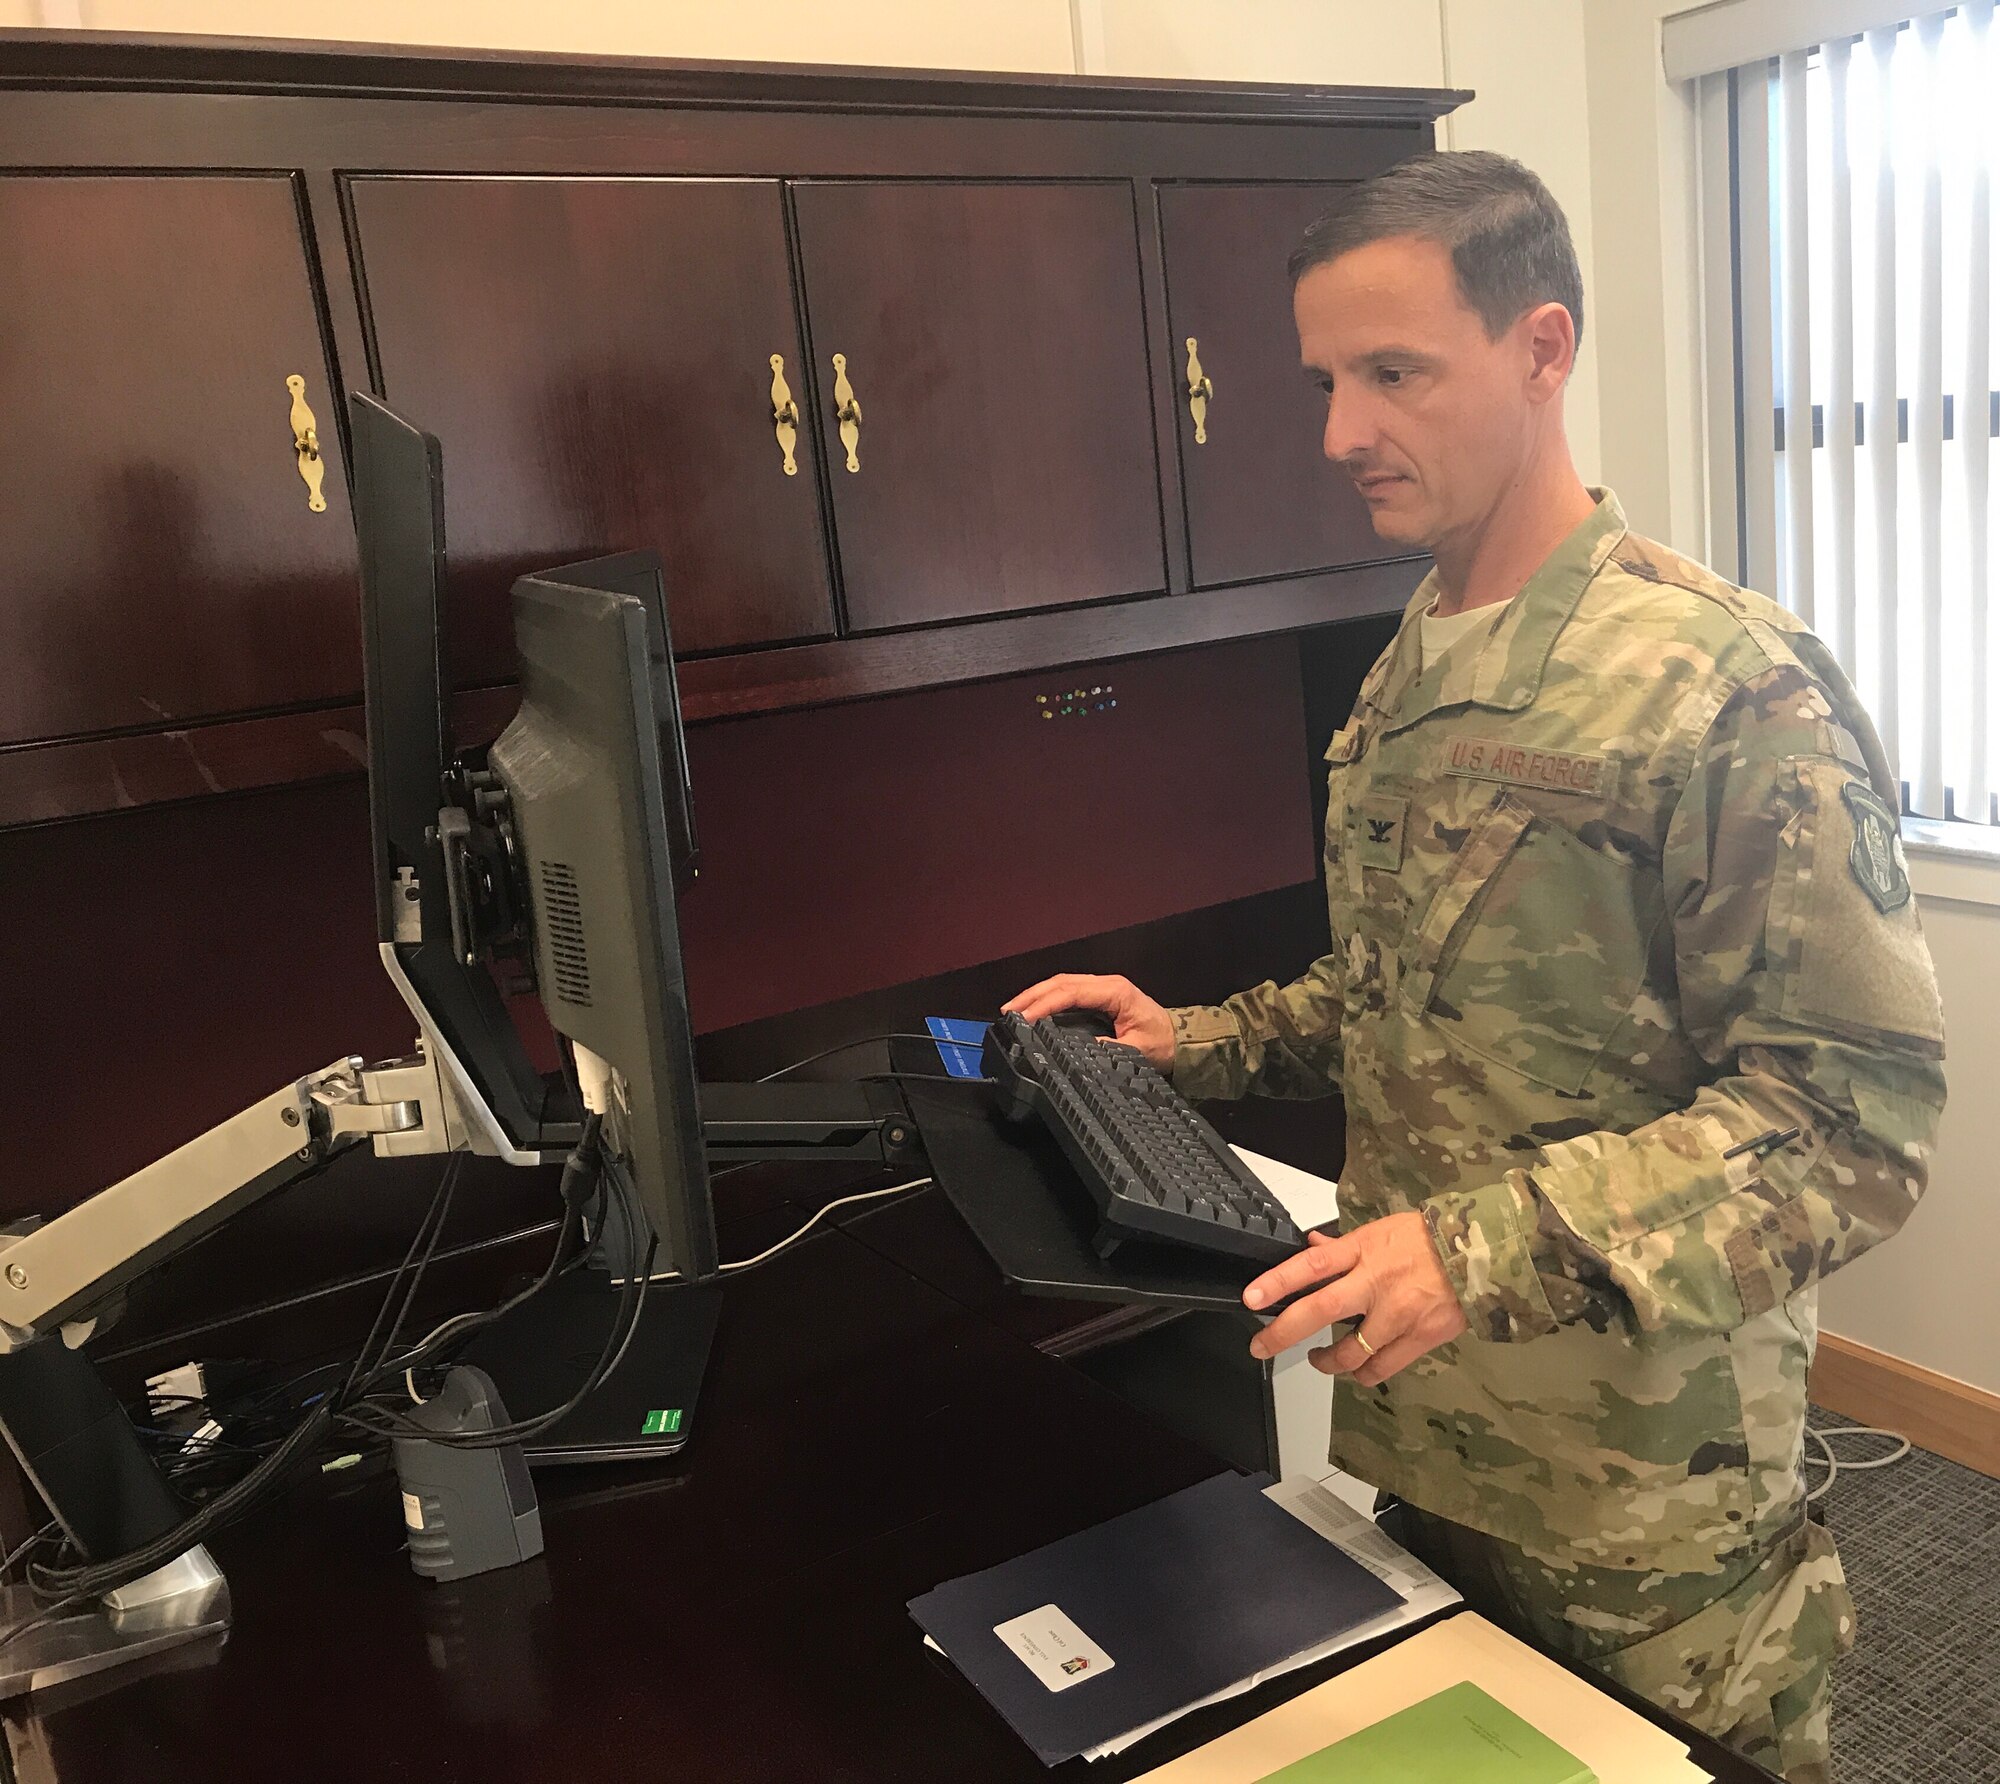 Col. Ian Chase, 920th Rescue Wing vice commander, works from his desk at Patrick AFB, Dec. 3, 2017. Chase joined the combat search and rescue reserve unit Aug. 5, 2017 and brings with him many years of experience as a navigator. In the past, Chase has been assigned to several special operations units including the 711th Special Operations Squadron, Duke Field, Florida. (U.S. Air Force photo by Senior Airman Brandon Kalloo Sanes)